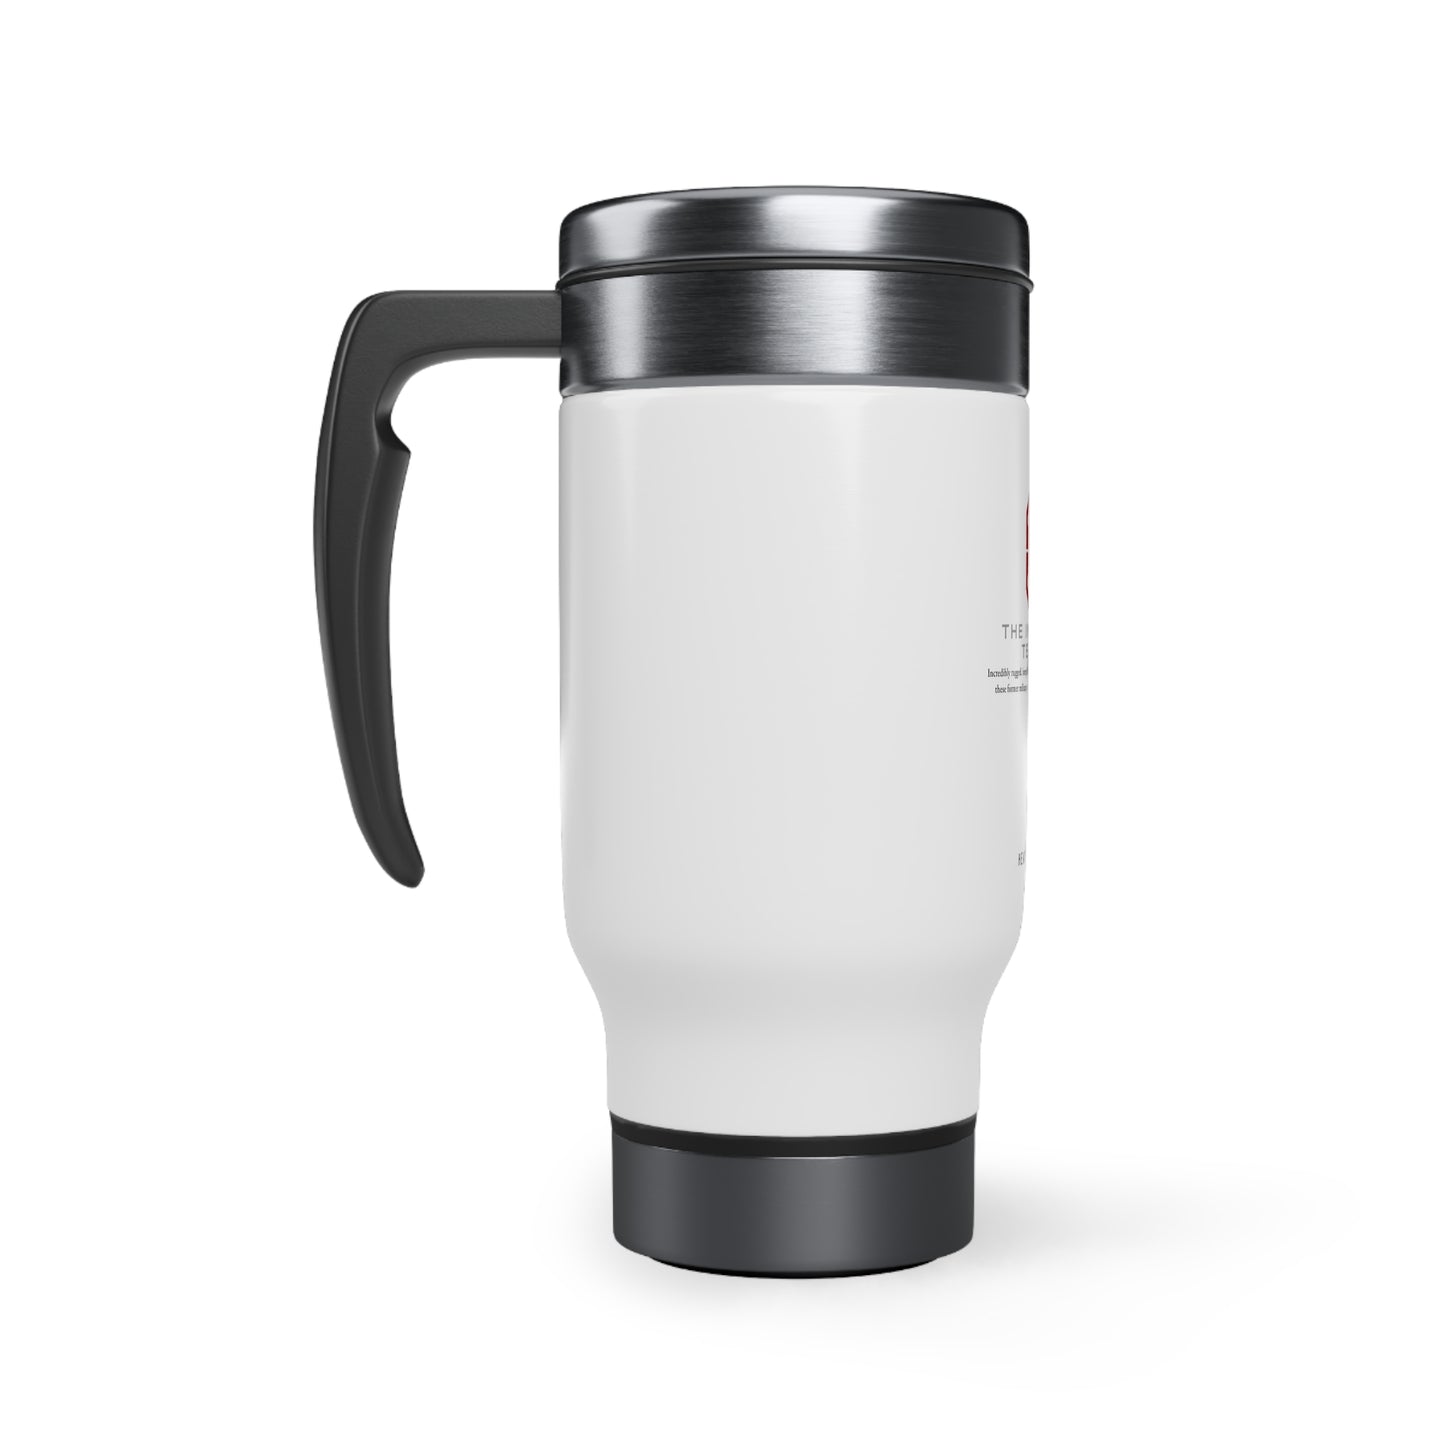 The Invincibles Team Two Stainless Steel Travel Mug with Handle, 14oz